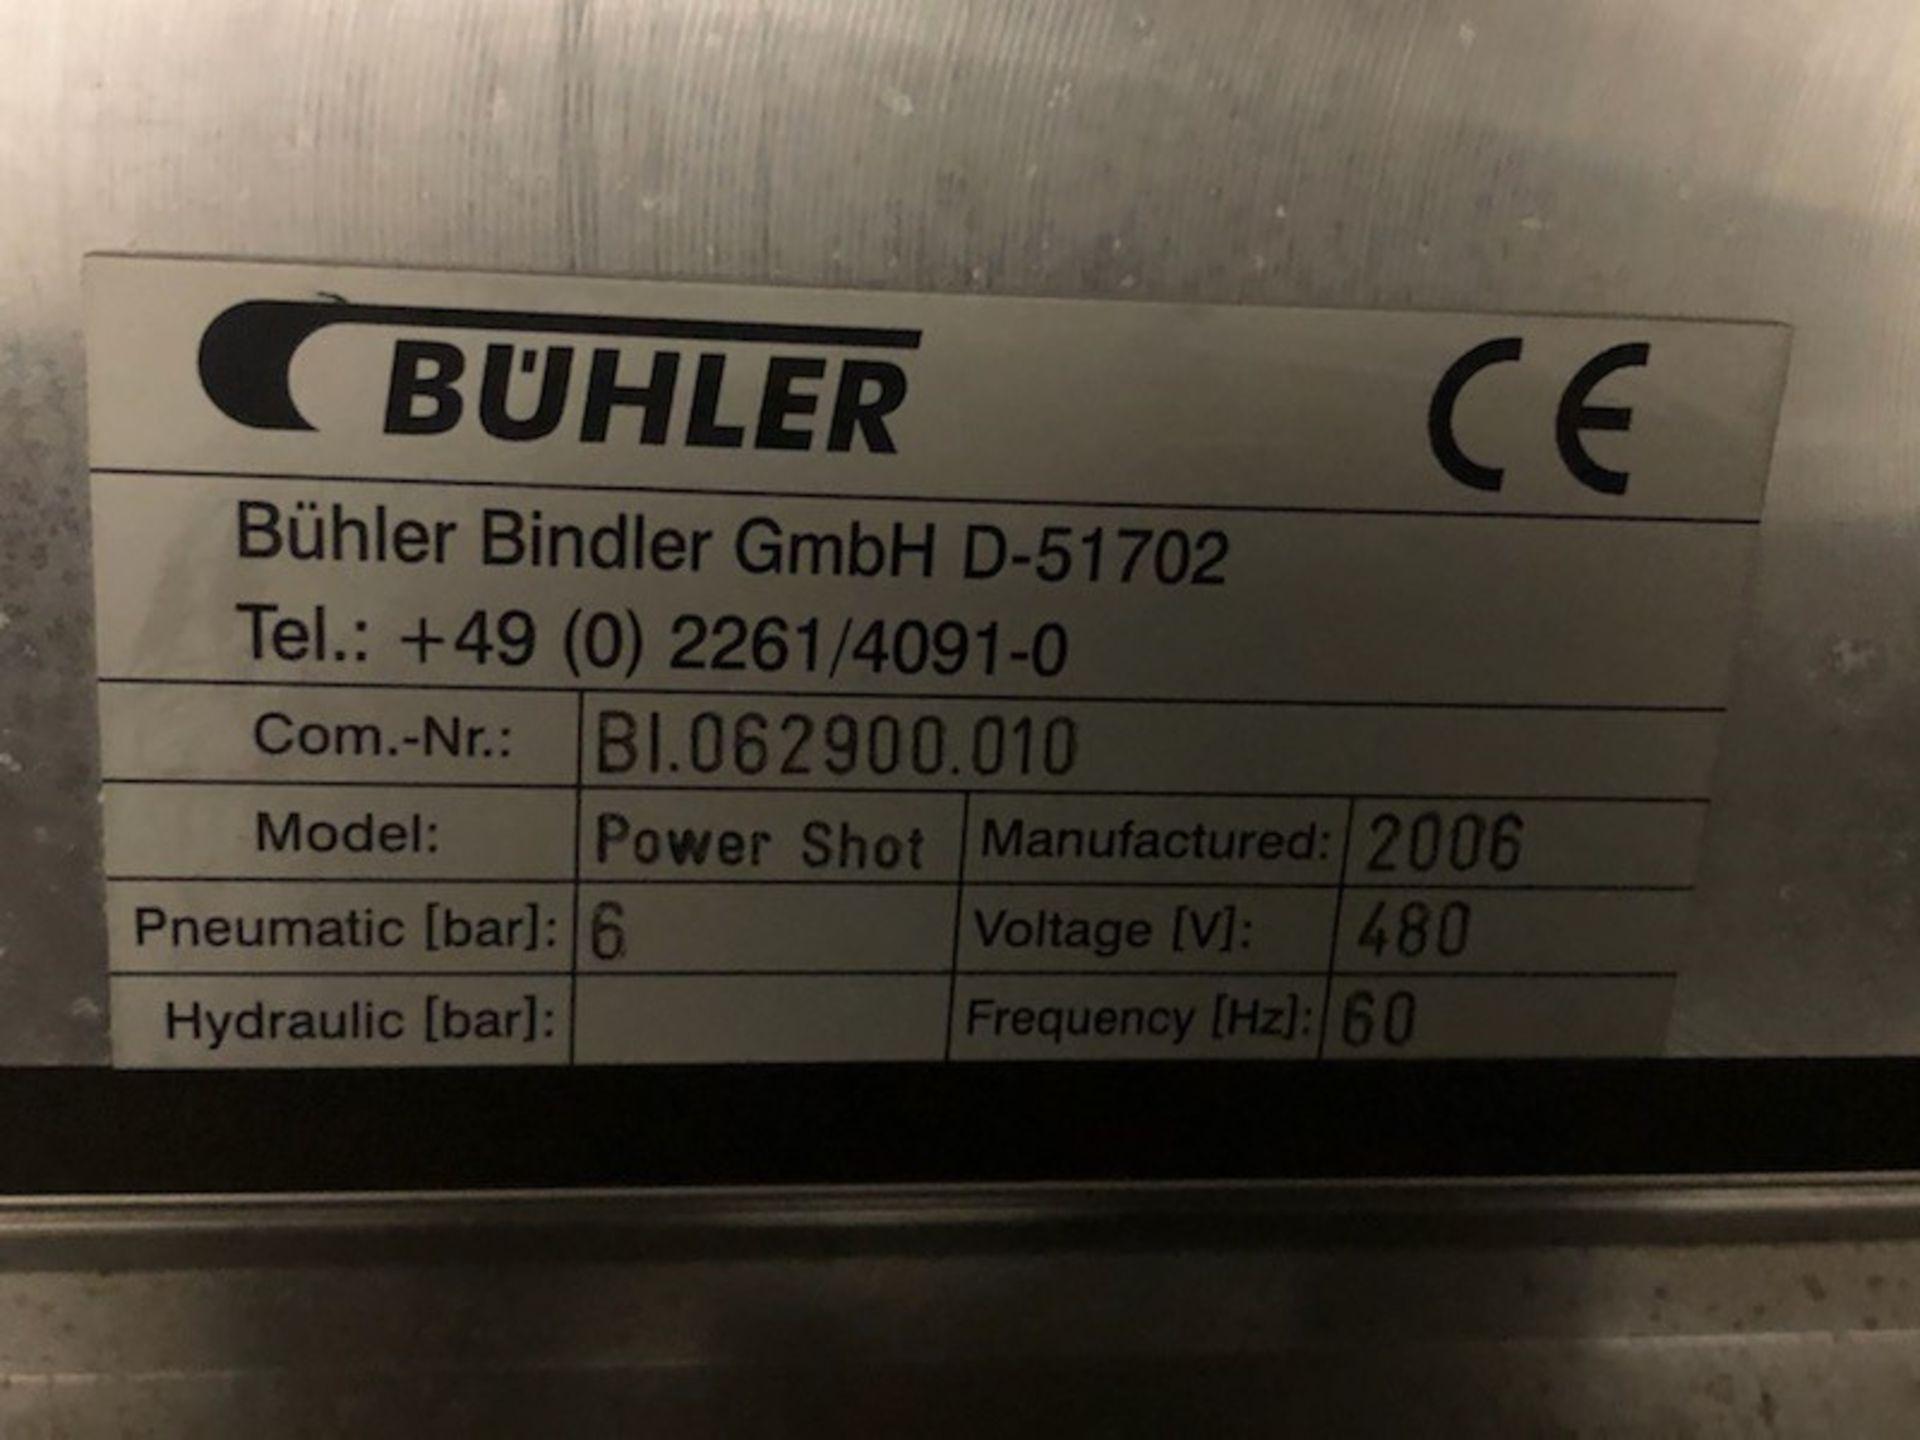 Buhler S/S Power Shot Depositor, with Single Temperature Chiller, S/N BI.062900.010, Siemens PLC - Image 2 of 2